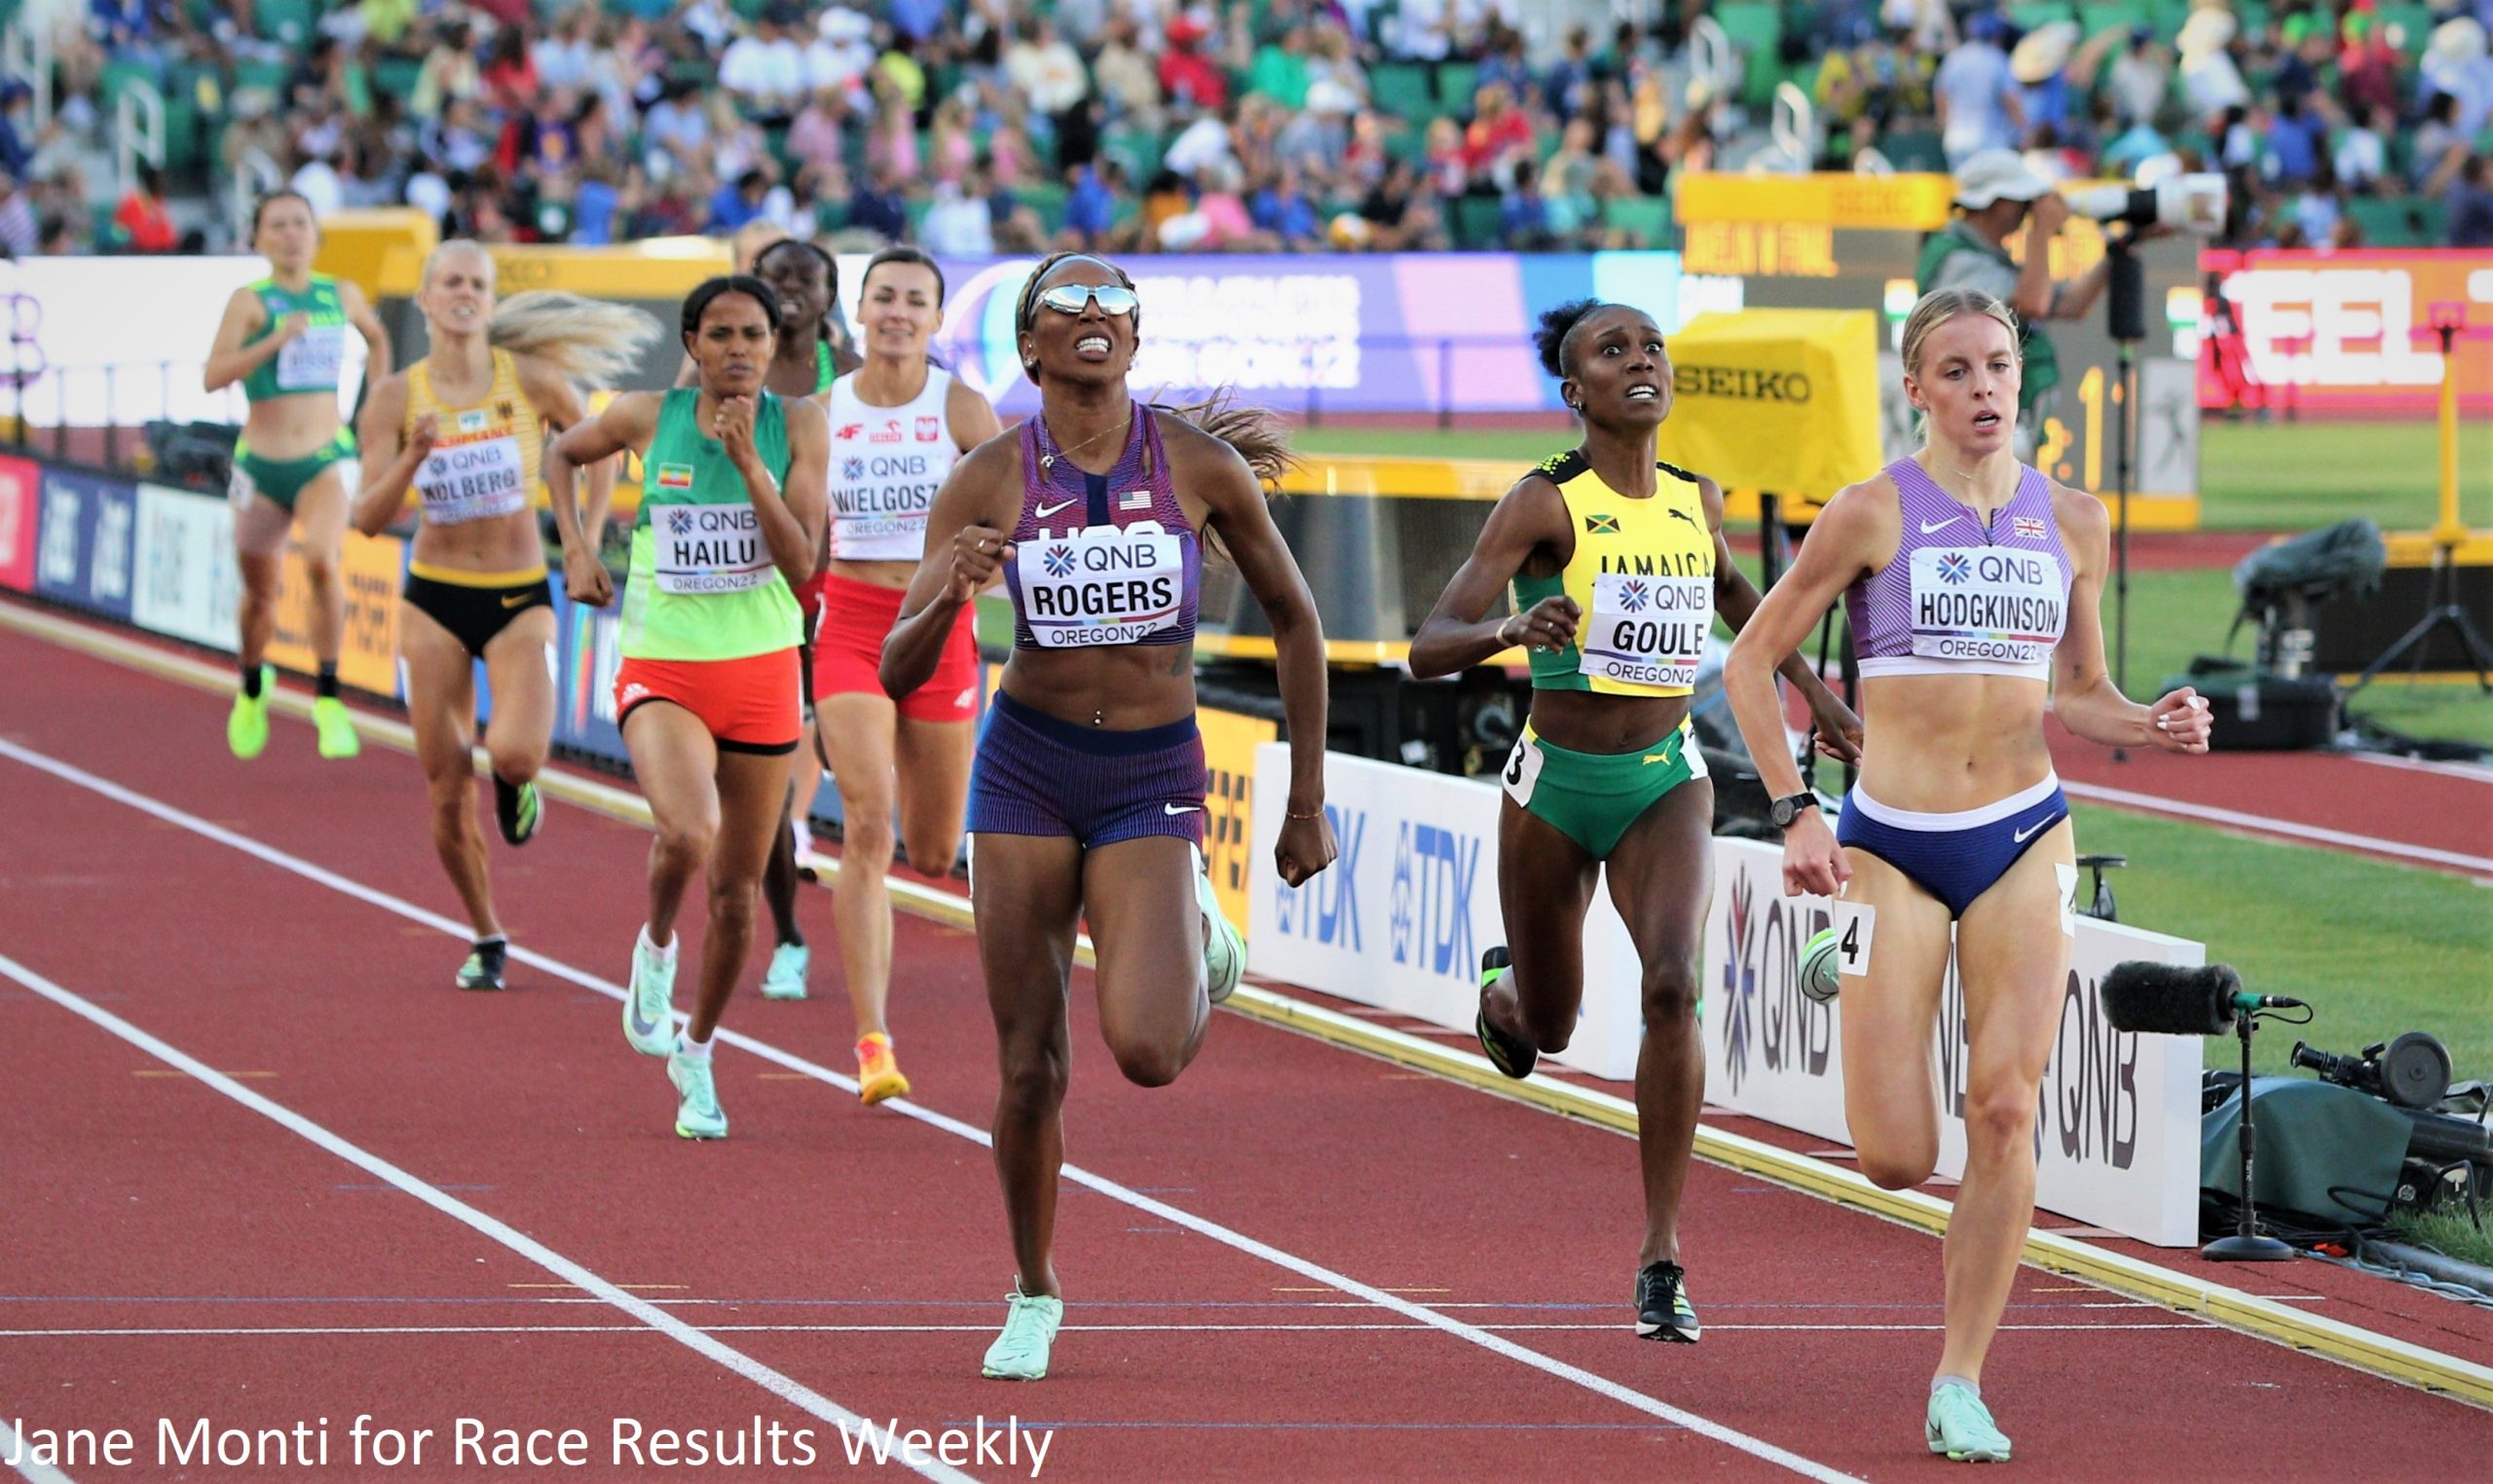 World Athletics Championships women's 800m is going to hot